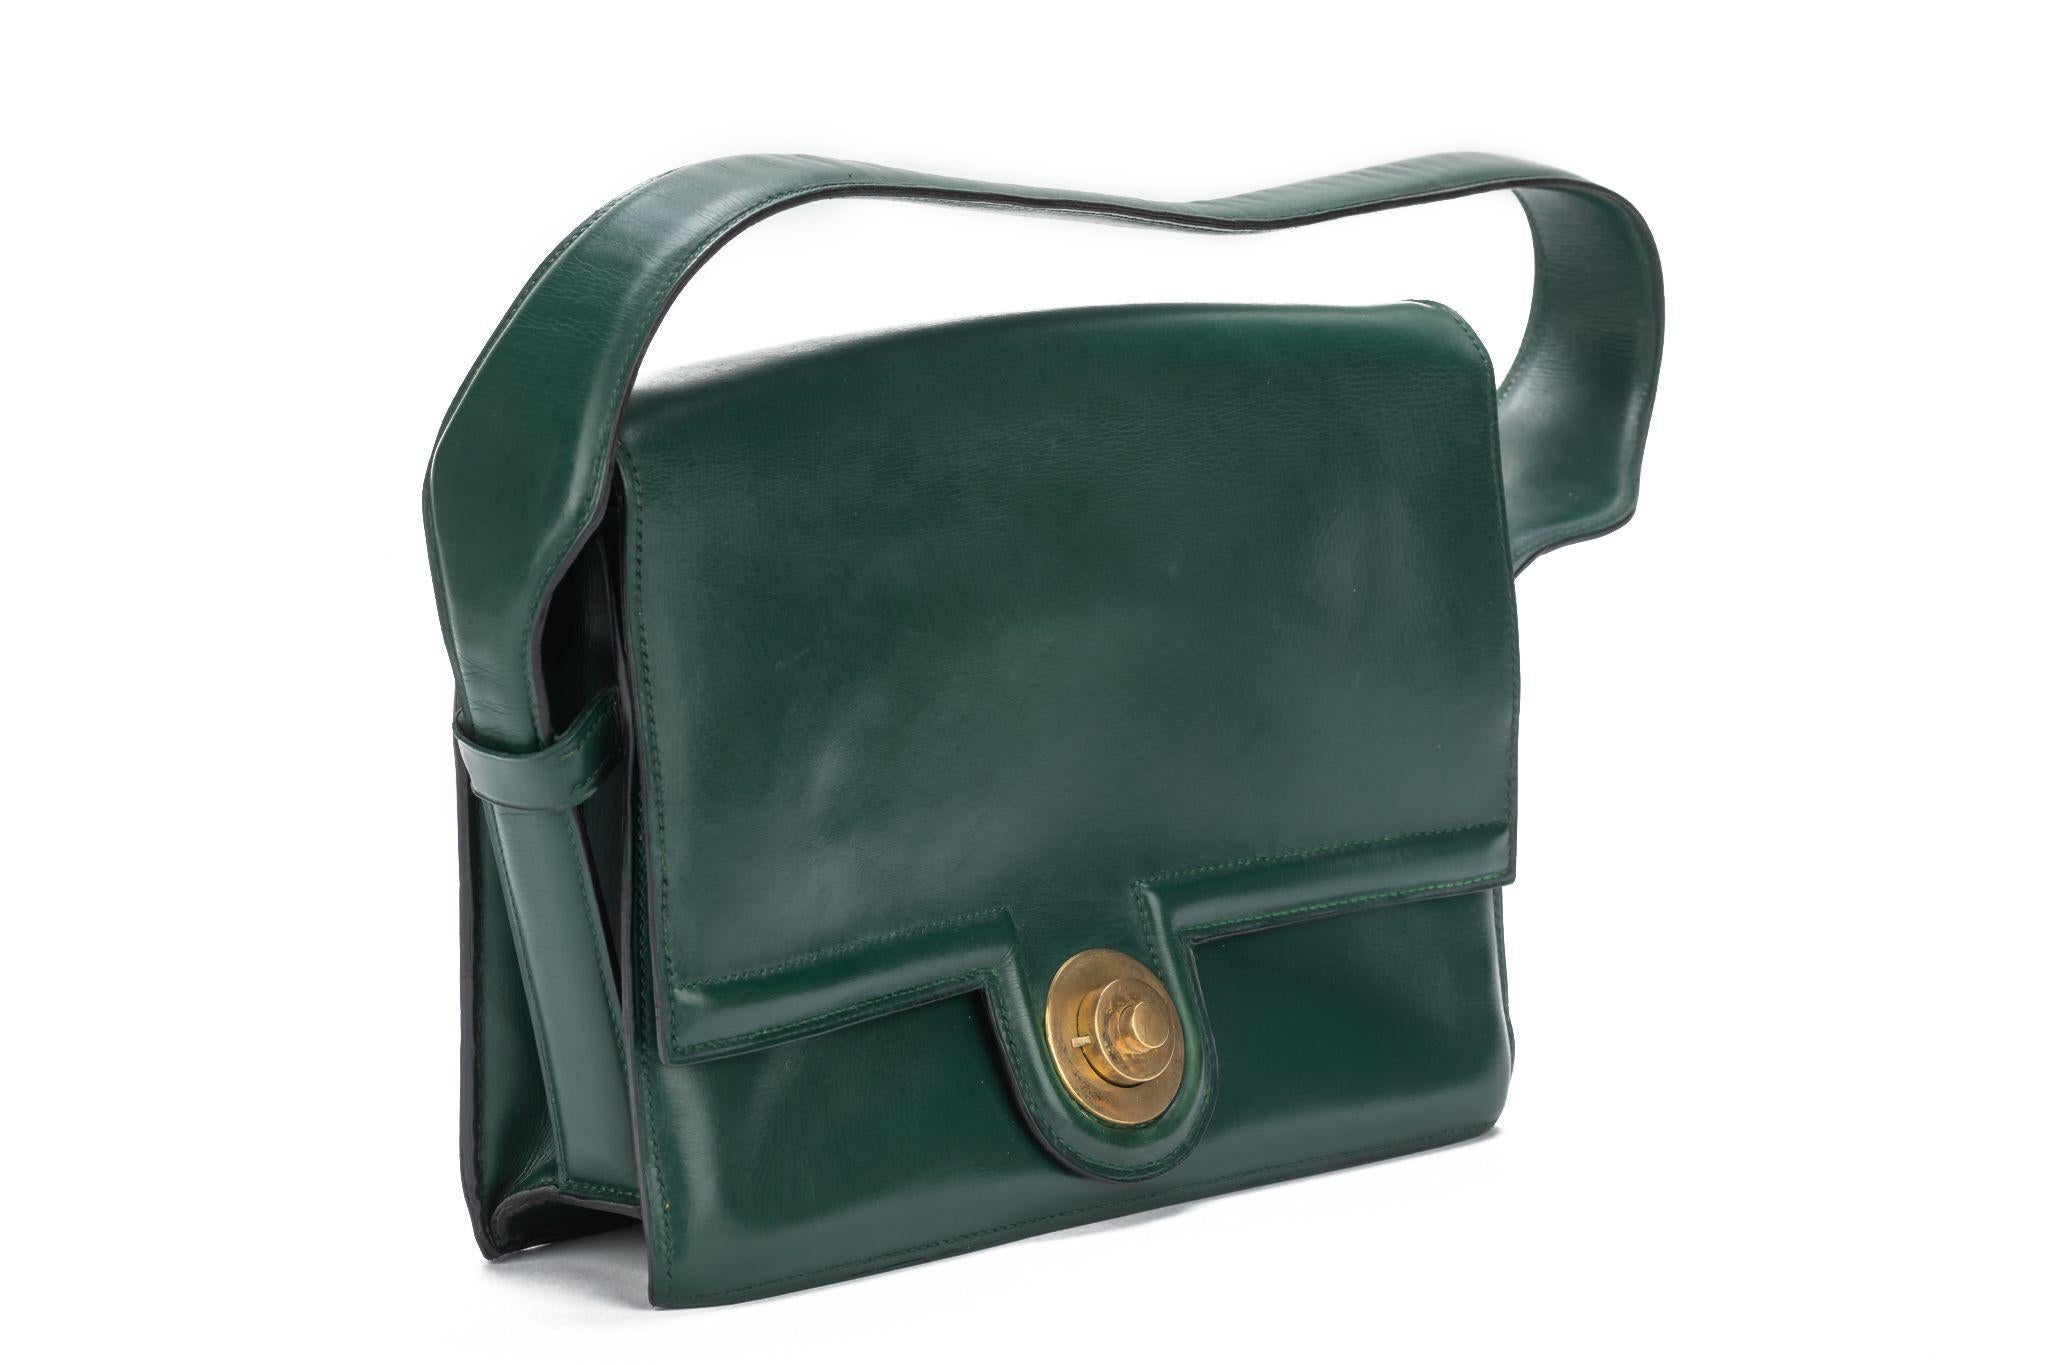 HERMÈS 1940 Sac Princesse Vintage shoulder bag in excellent condition. Forest green and gold tone hardware. The piece's shoulder strap measures 6 inches and it comes with a generic dustcover.